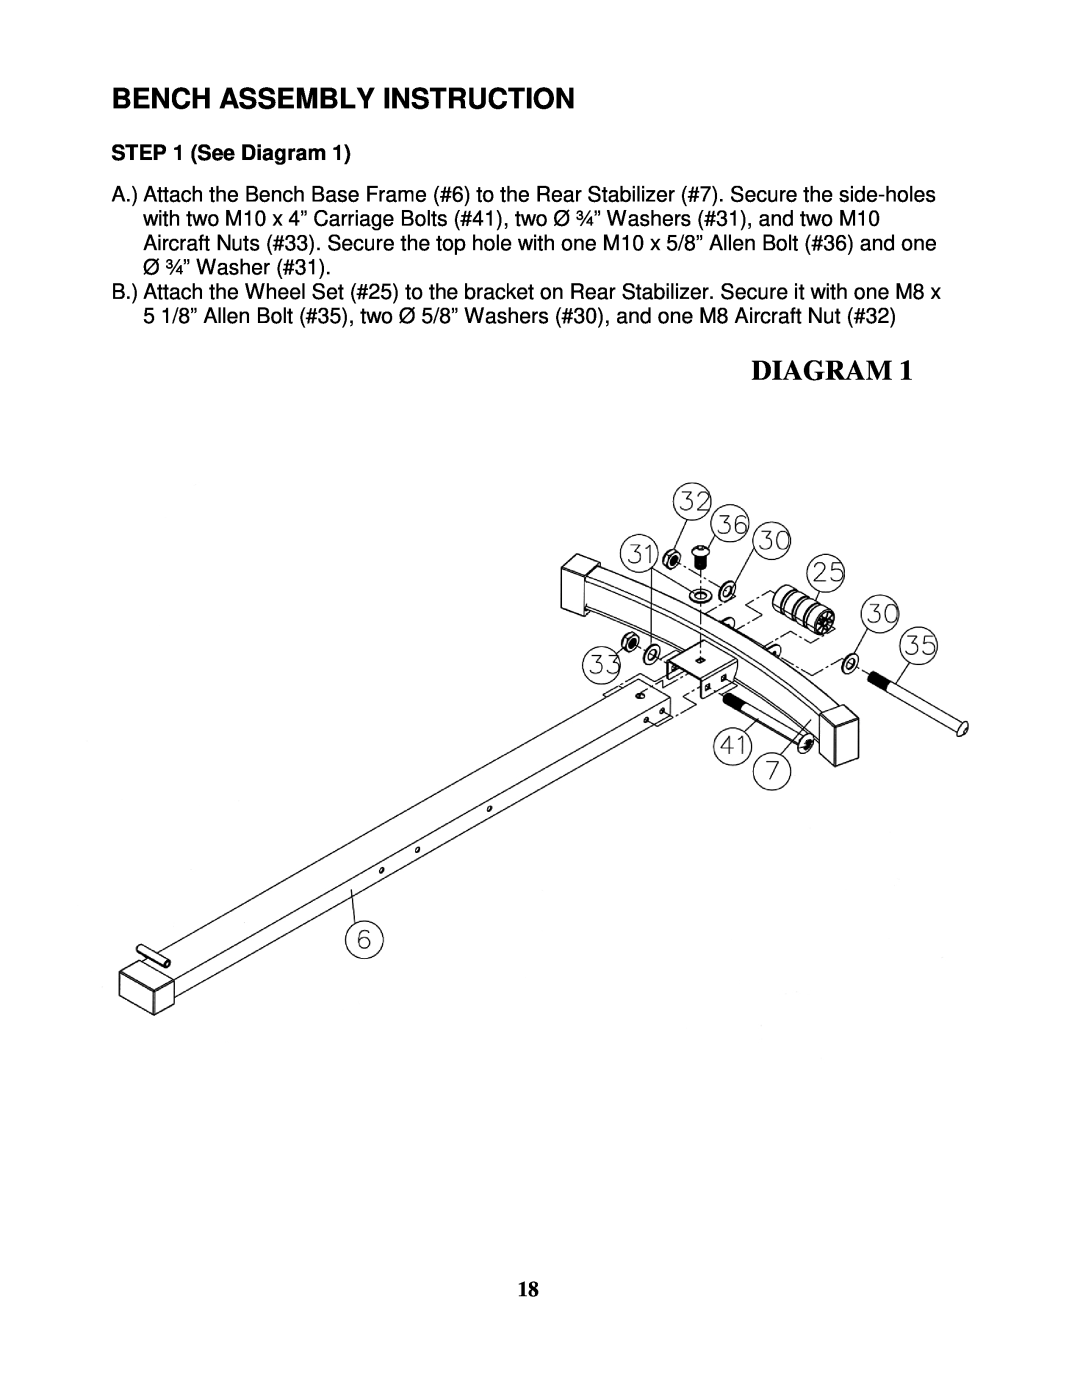 Impex MD-8850 manual Bench Assembly Instruction, See Diagram 